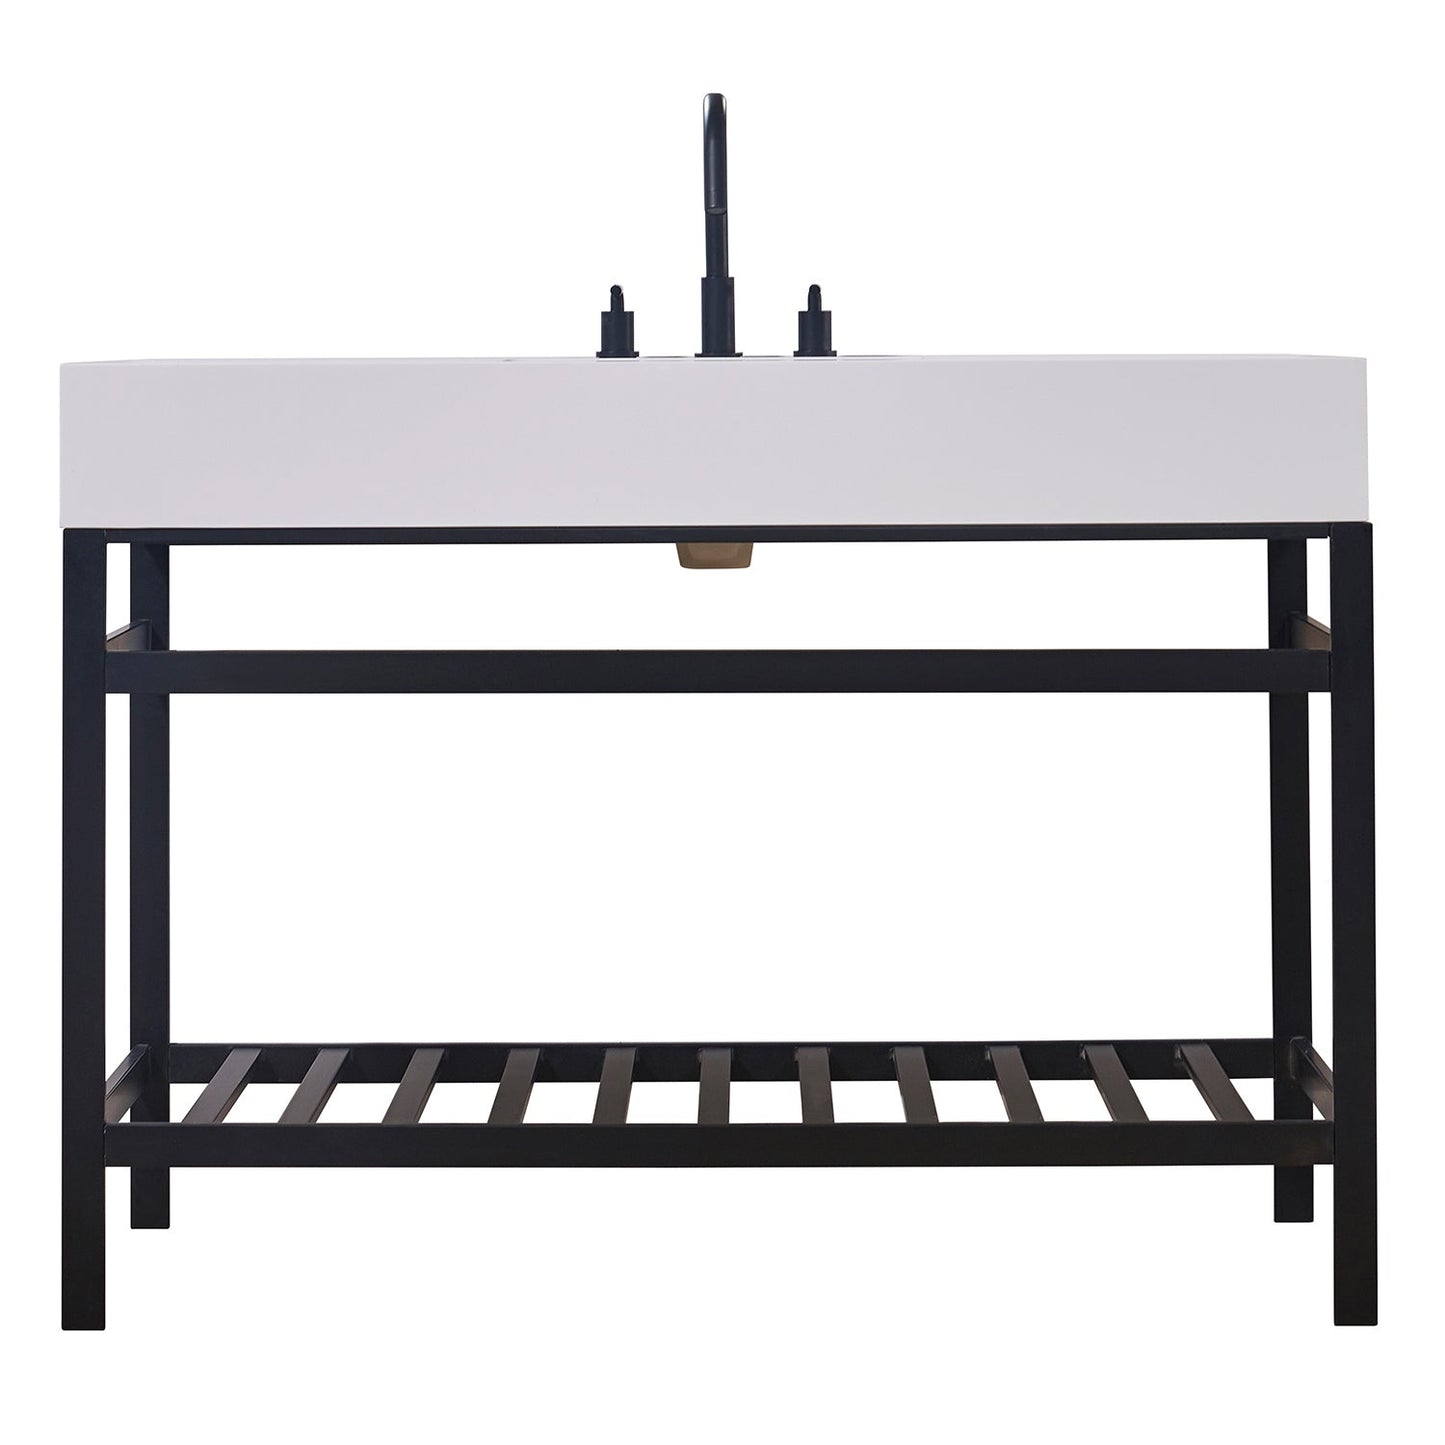 Edolo 48" Single Stainless Steel Vanity Console in Matt Black with Snow White Stone Countertop without Mirror